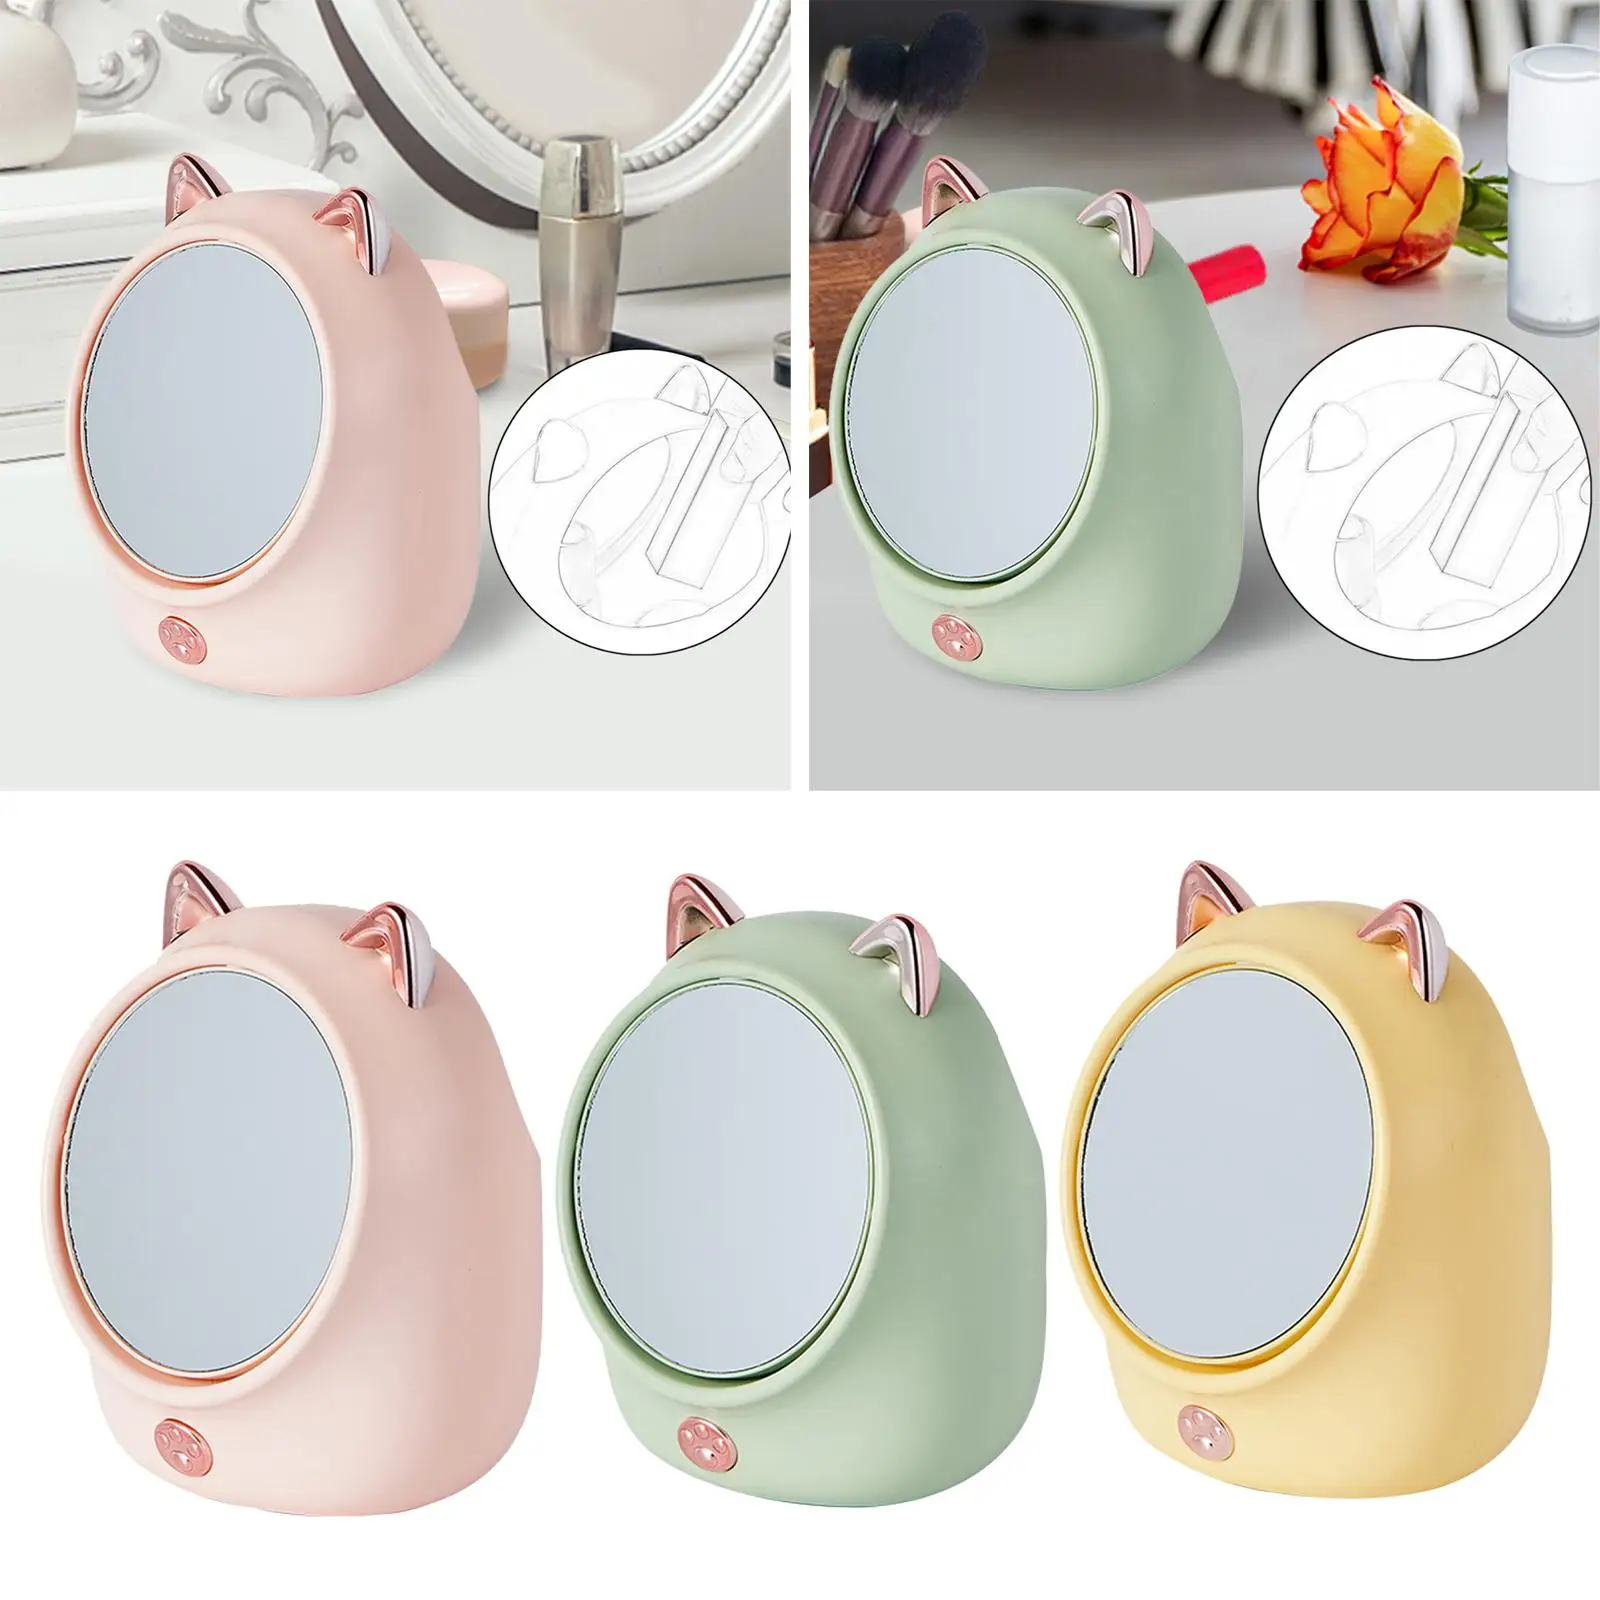 Makeup Storage Box with Double Sided Mirror 360 Degree Rotation Tabletop Mirror Jewelry Organizer for Dressing Table Desk